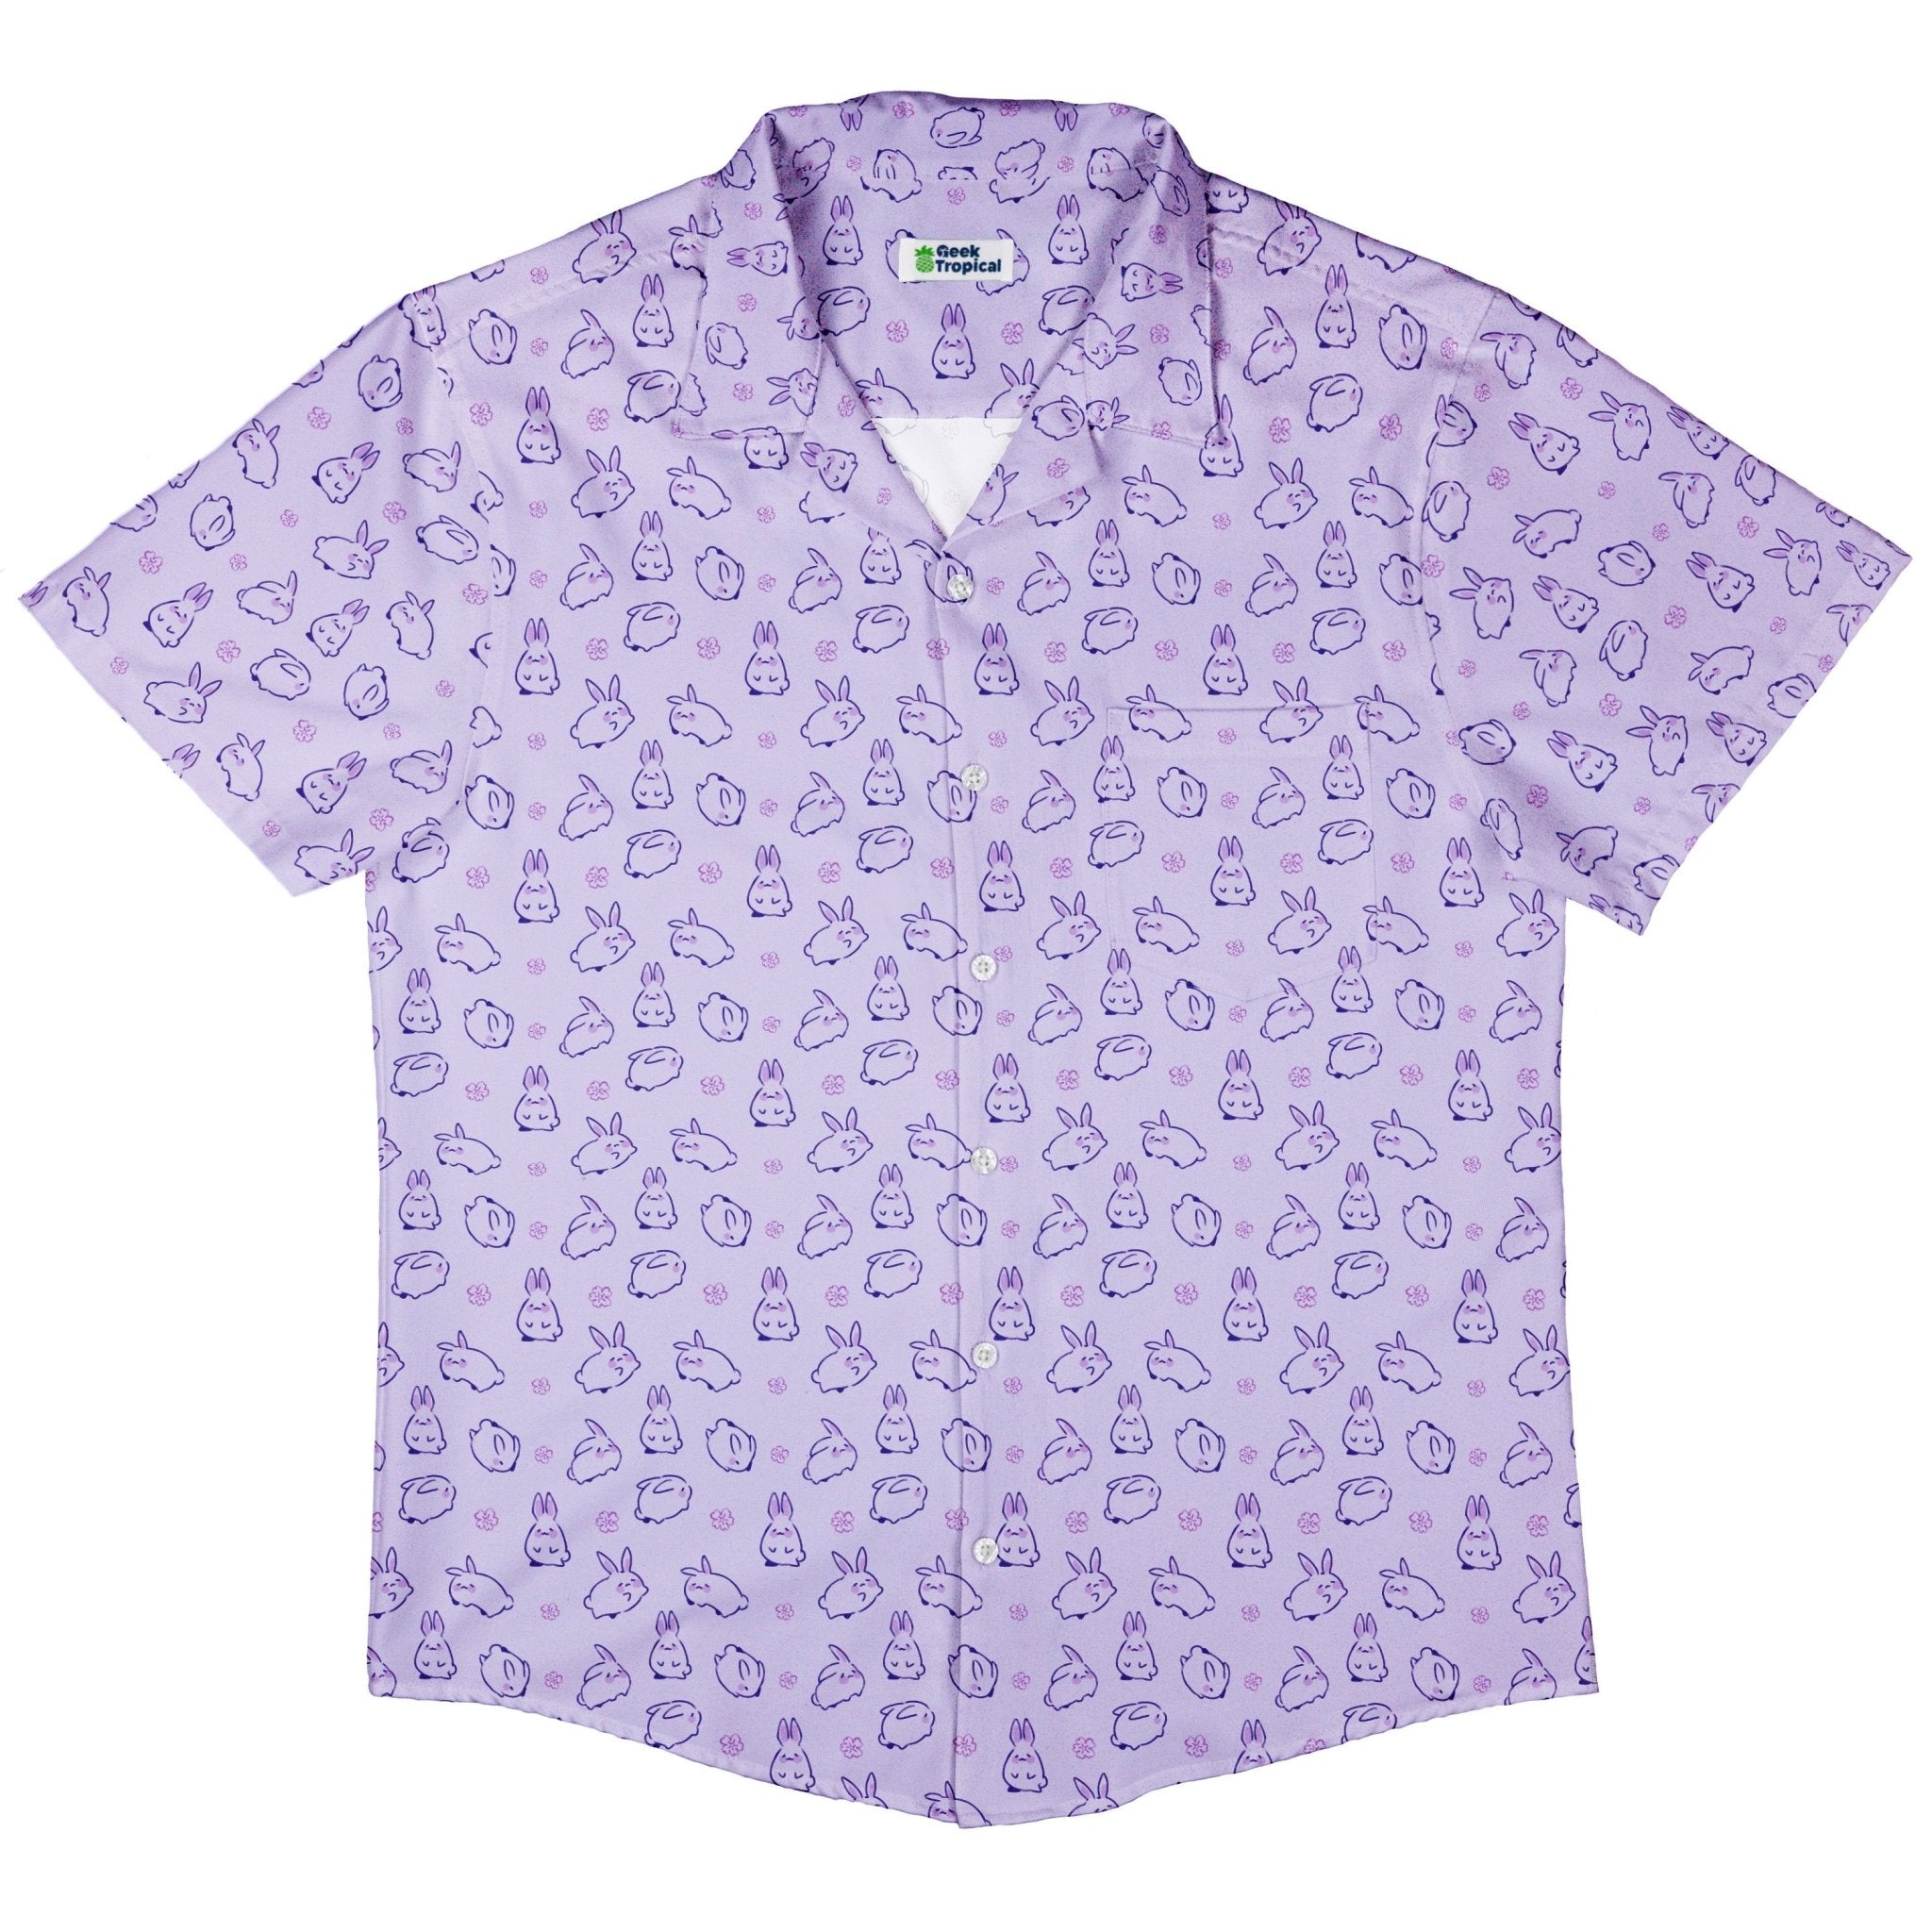 Lilac Anime Bunnies Button Up Shirt - Animal Patterns - Anime - Design by Ardi Tong